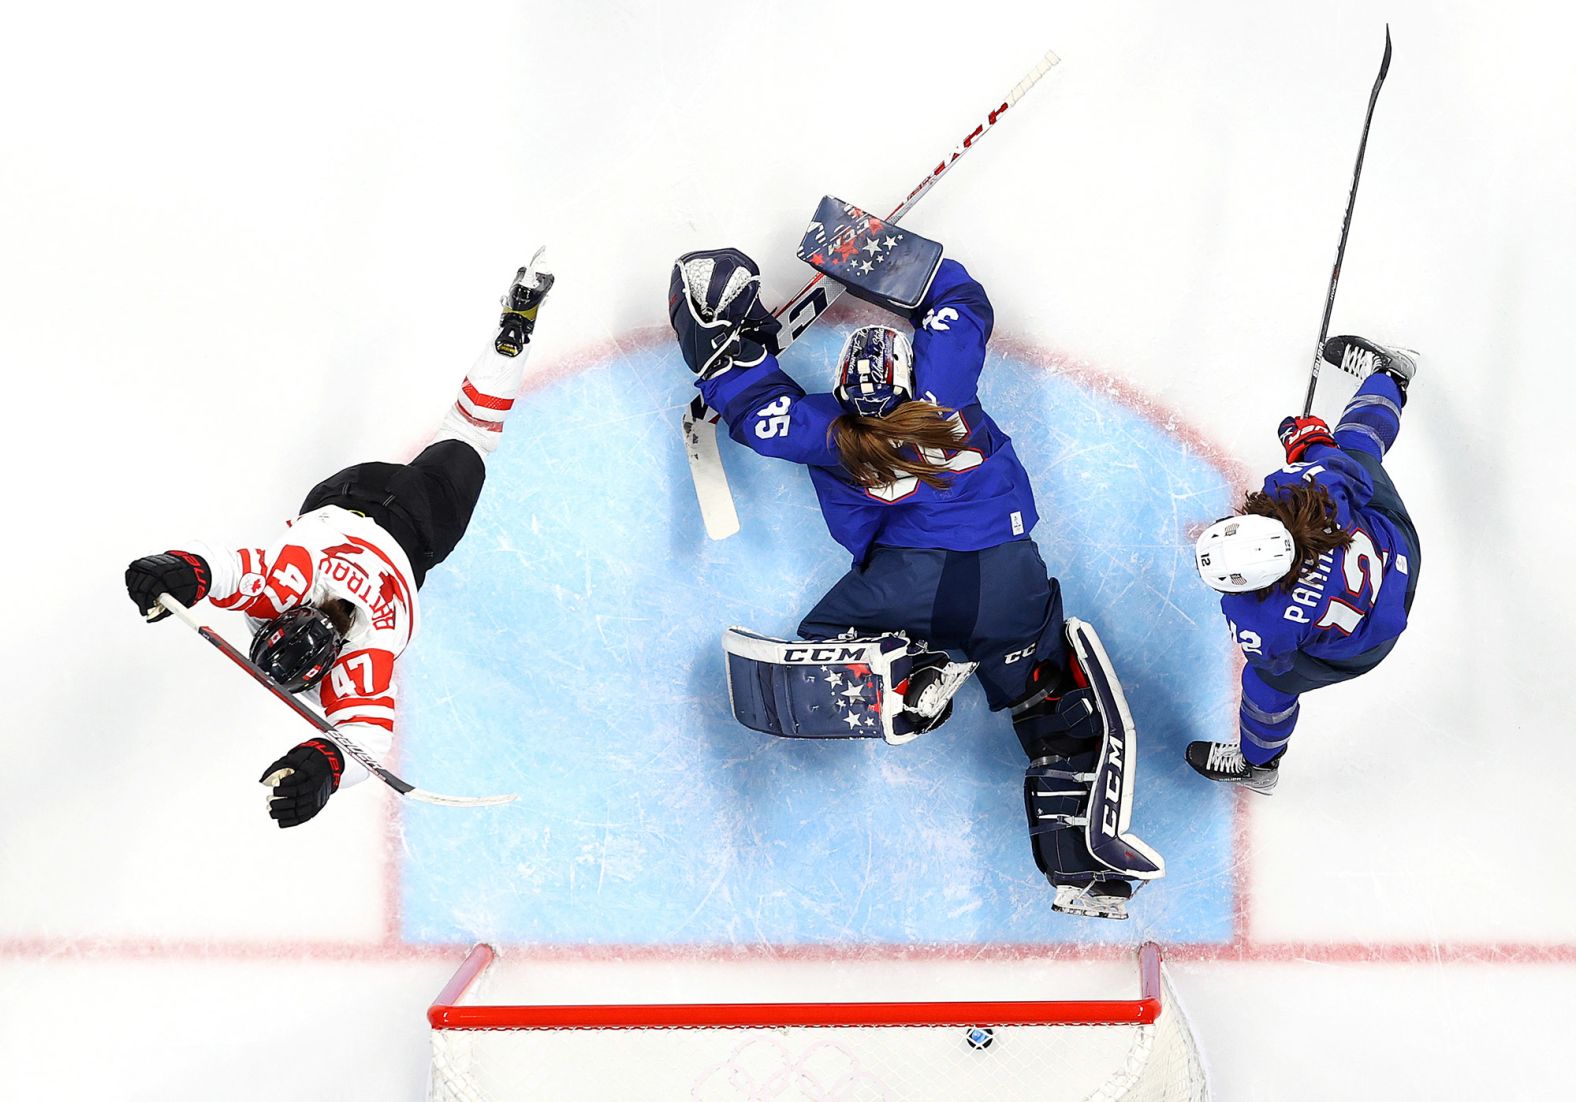 Canada's Jamie Lee Rattray, left, reacts after scoring a goal against the United States during a women's hockey game on February 8. <a href="index.php?page=&url=https%3A%2F%2Fwww.cnn.com%2Fworld%2Flive-news%2Fbeijing-winter-olympics-02-08-22-spt%2Fh_8b437024e1f1fc74713710821cb3d75b" target="_blank">Canada won 4-2.</a>